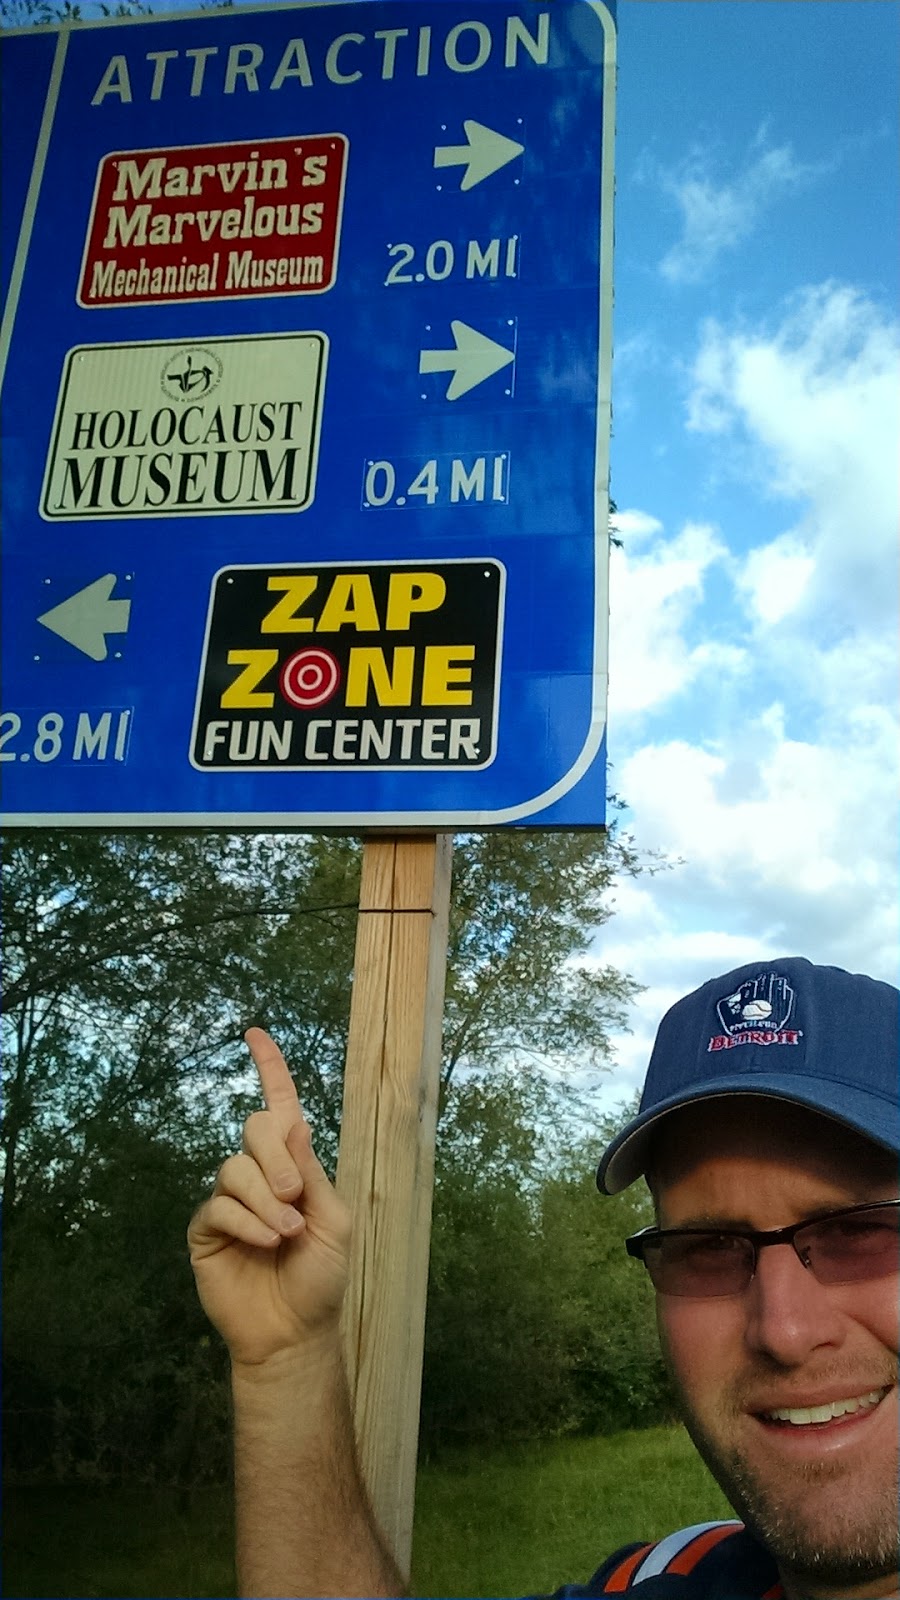 In Metro Detroit, a new highway sign puts the Holocaust Museum between two video arcade centers